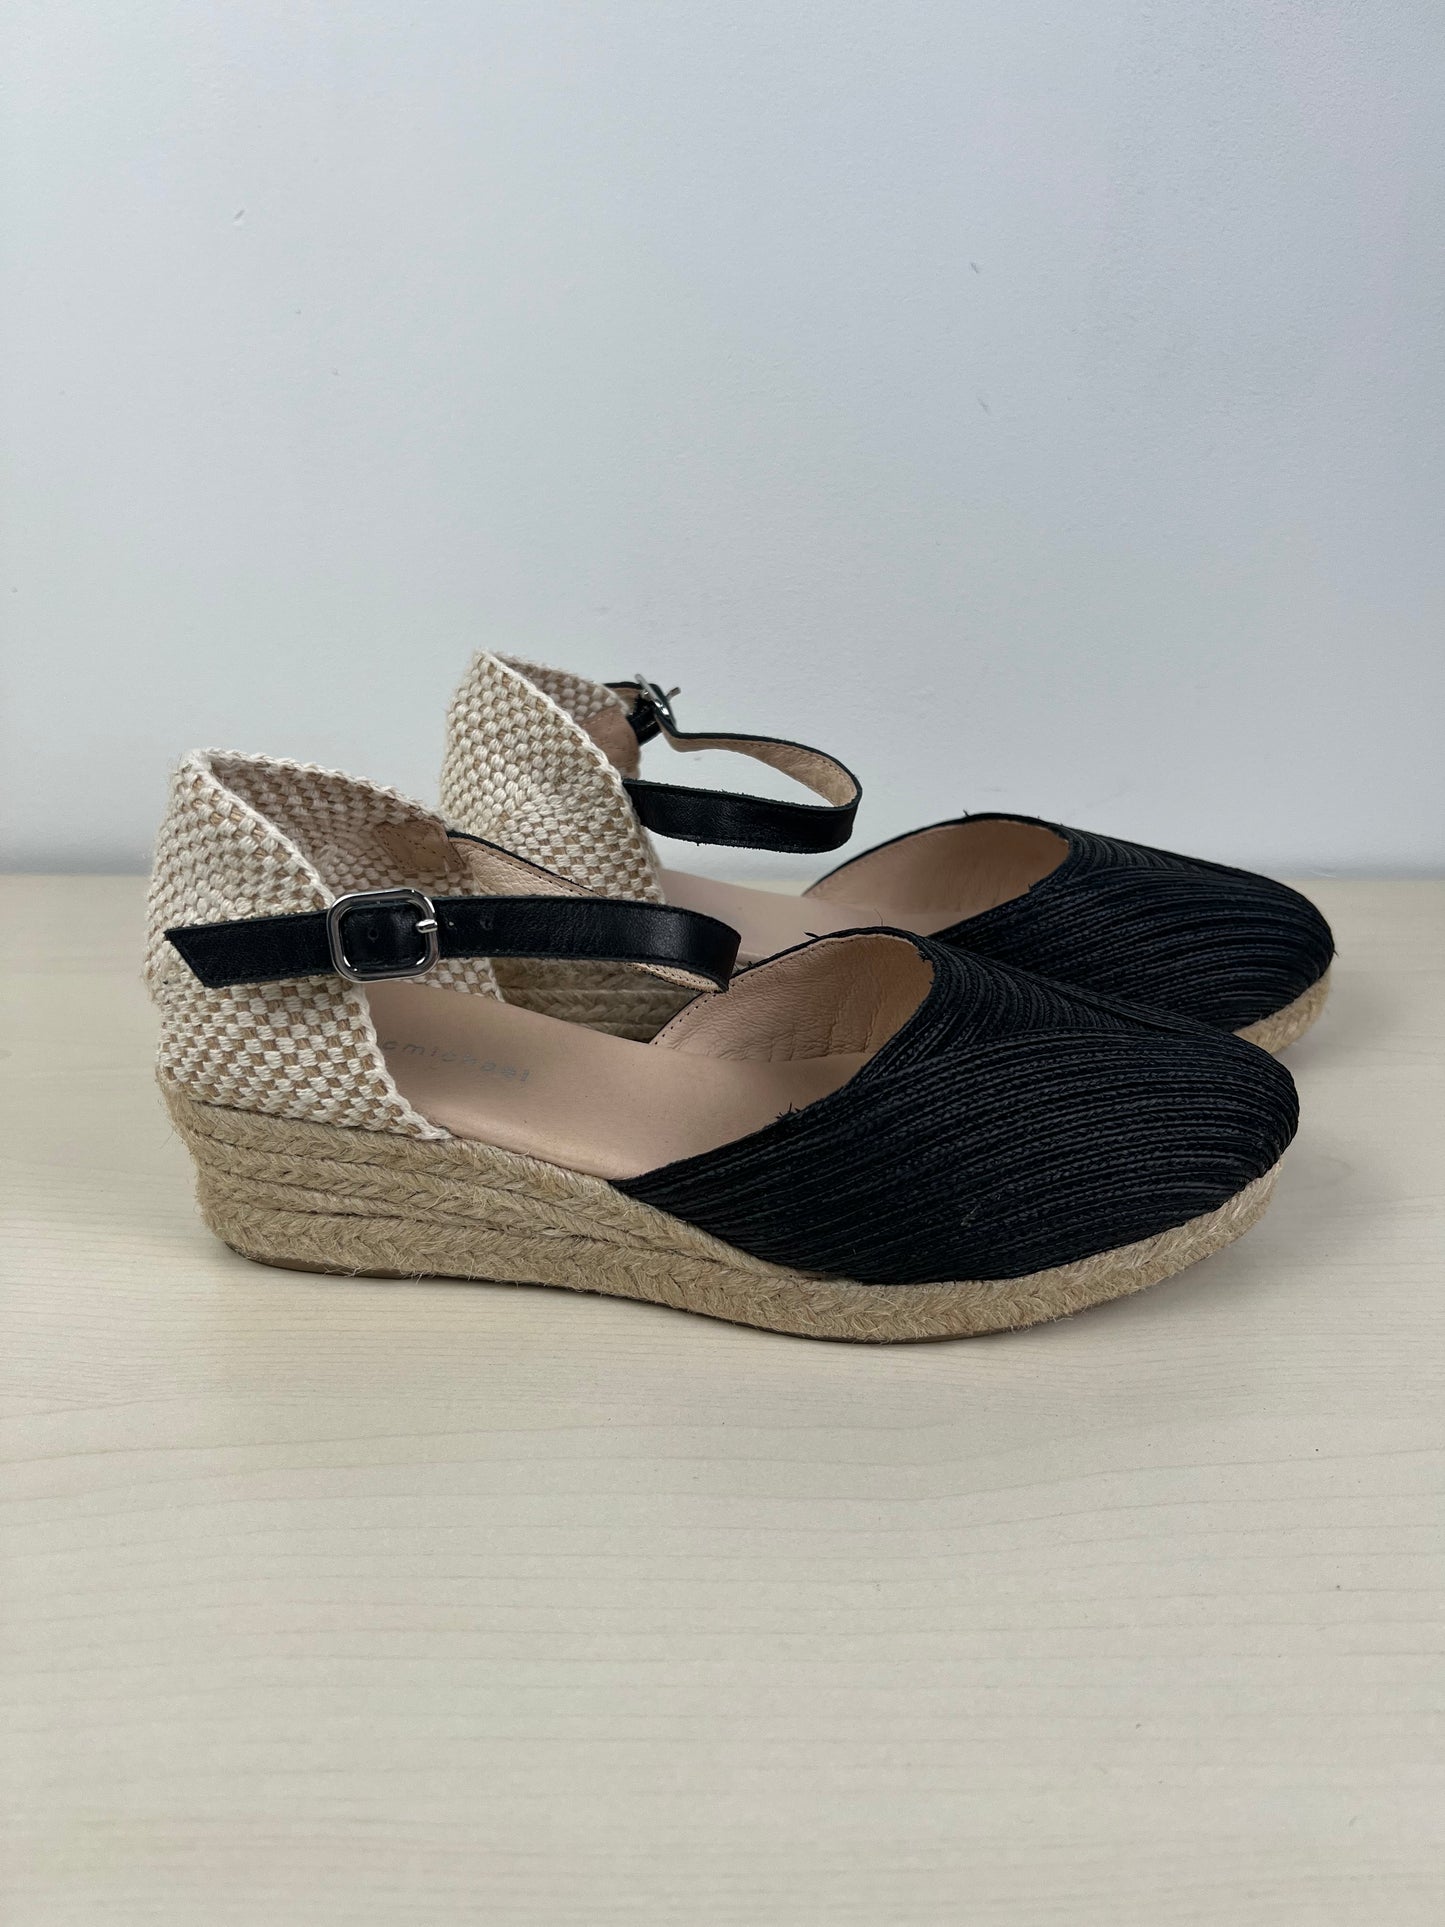 Shoes Heels Wedge By Eric Michael London  Size: 8.5